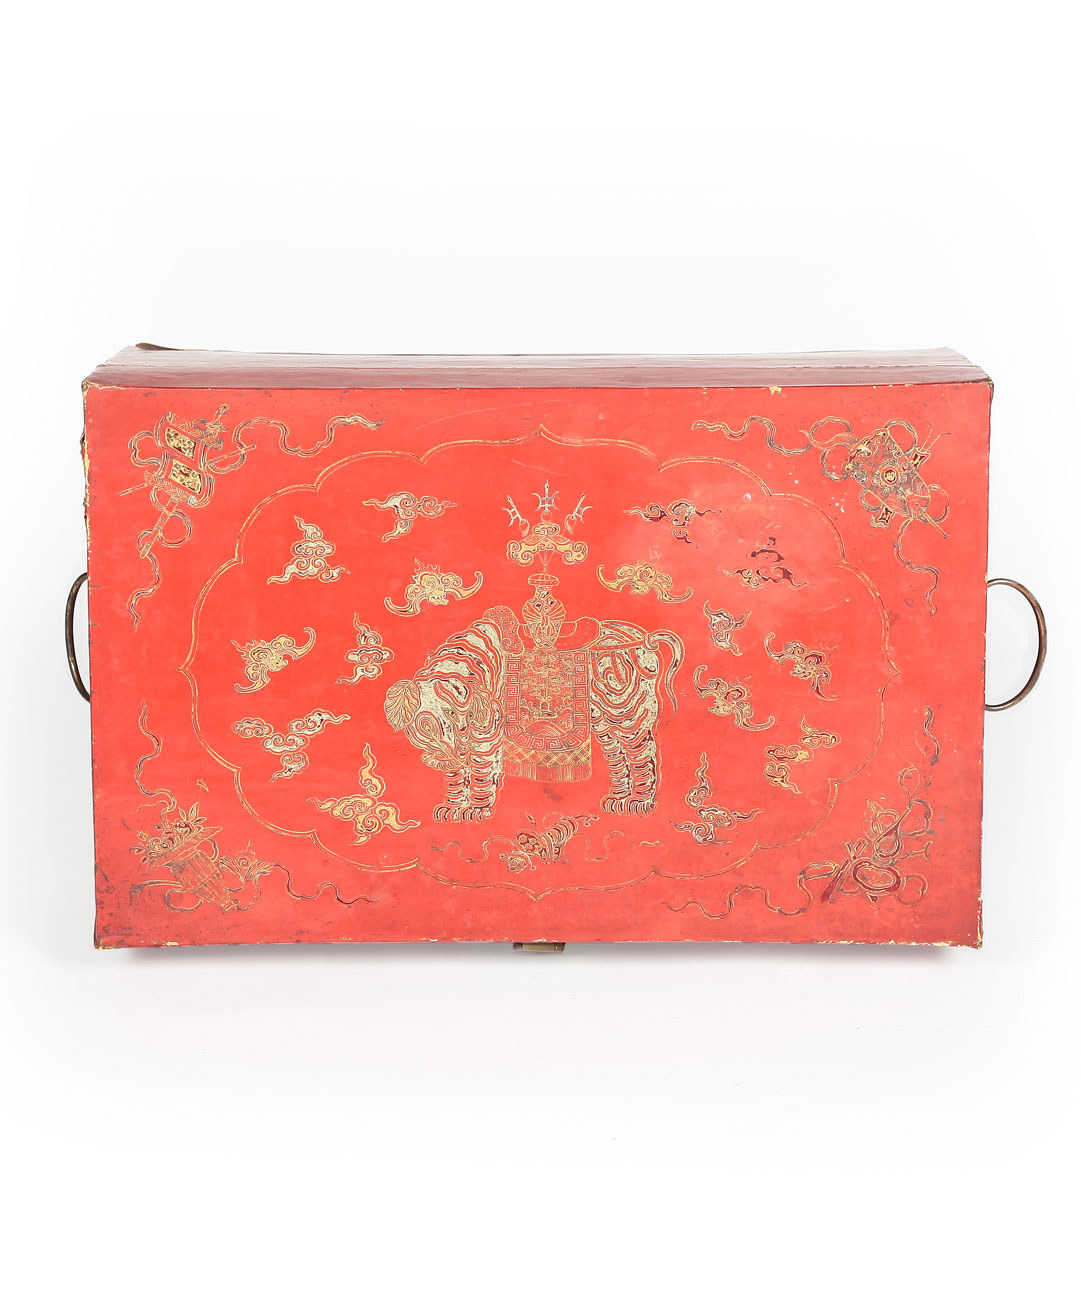 Antique Red Lacquer Trunk